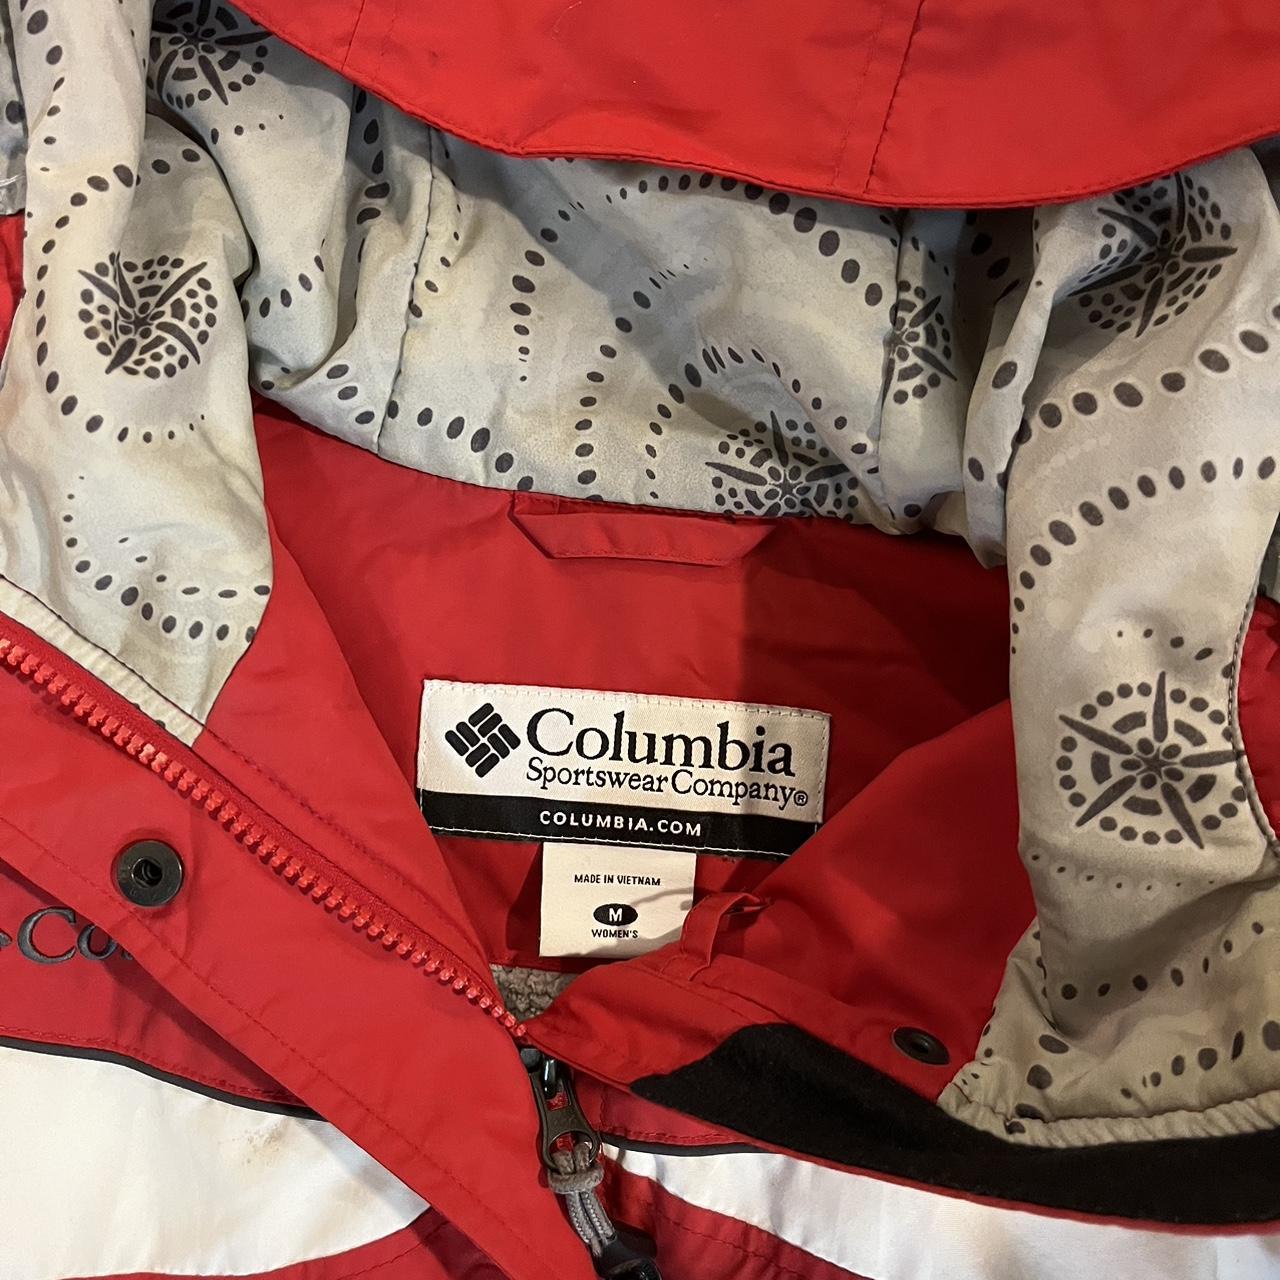 Columbia Sportswear Men's Red and White Jacket | Depop